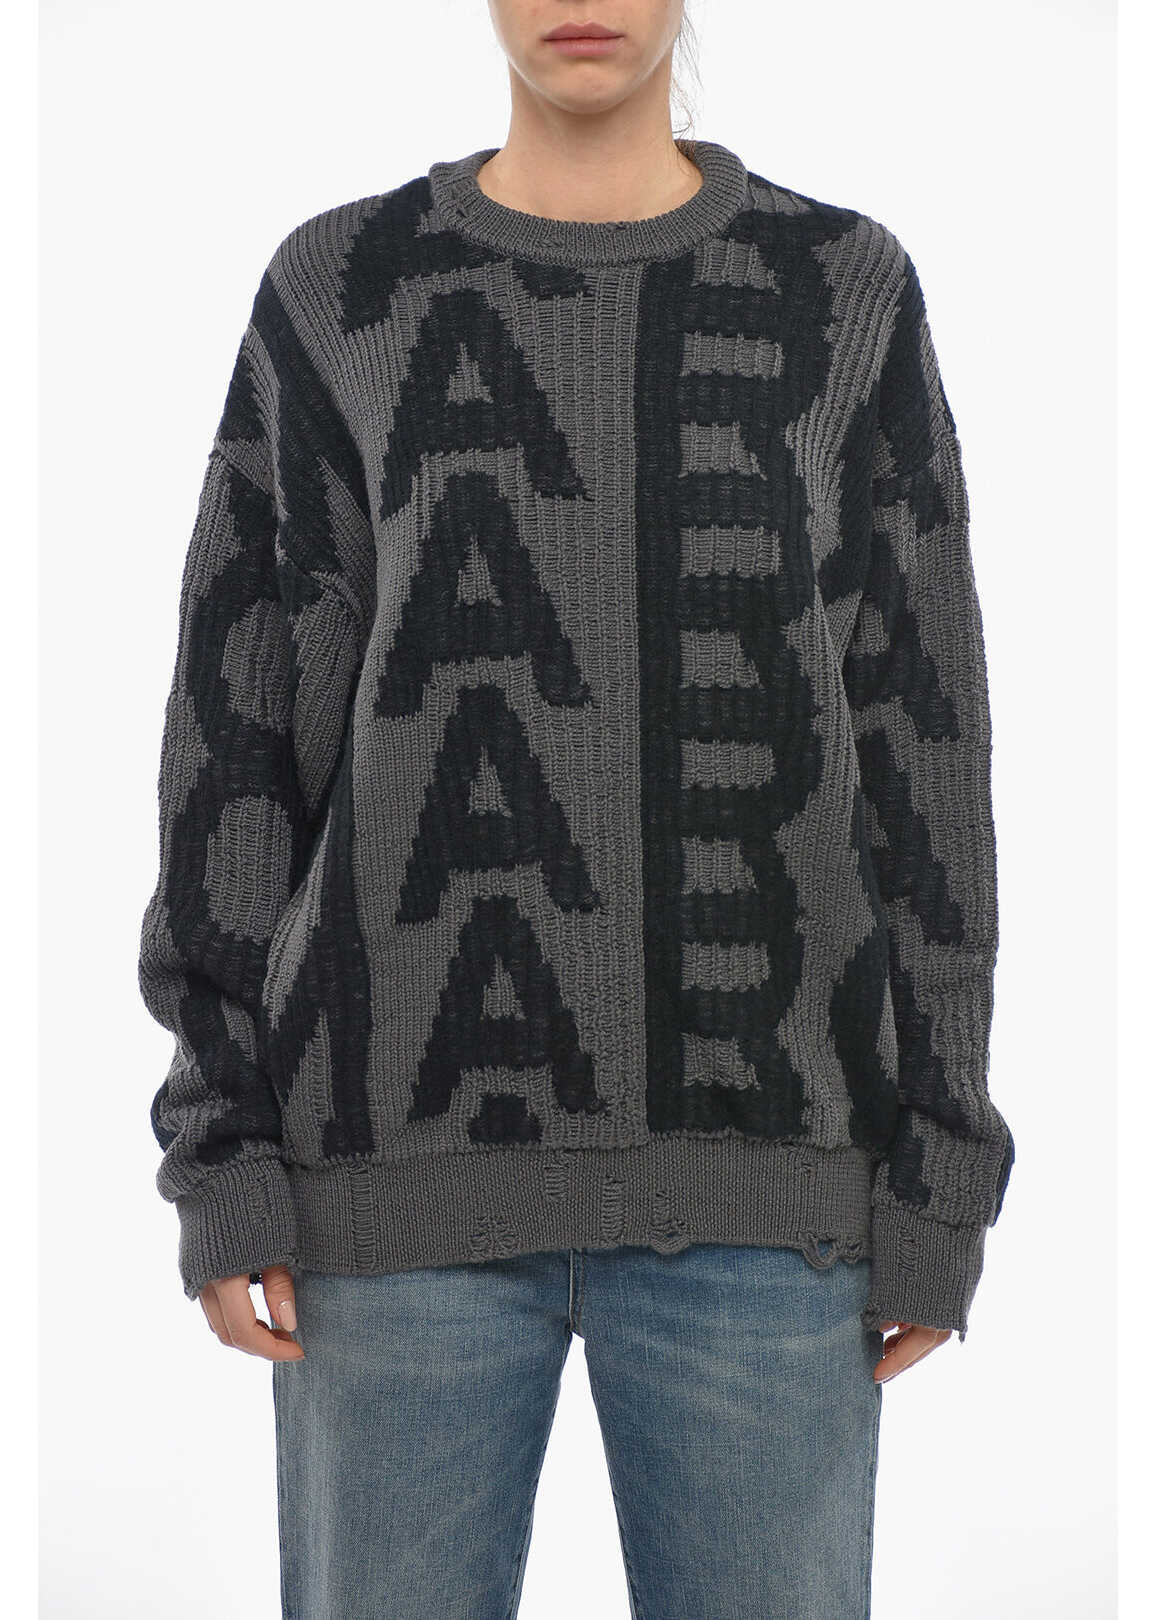 Poze Marc Jacobs Wool Blend Oversized Pullover With Monogram Pattern Gray b-mall.ro 